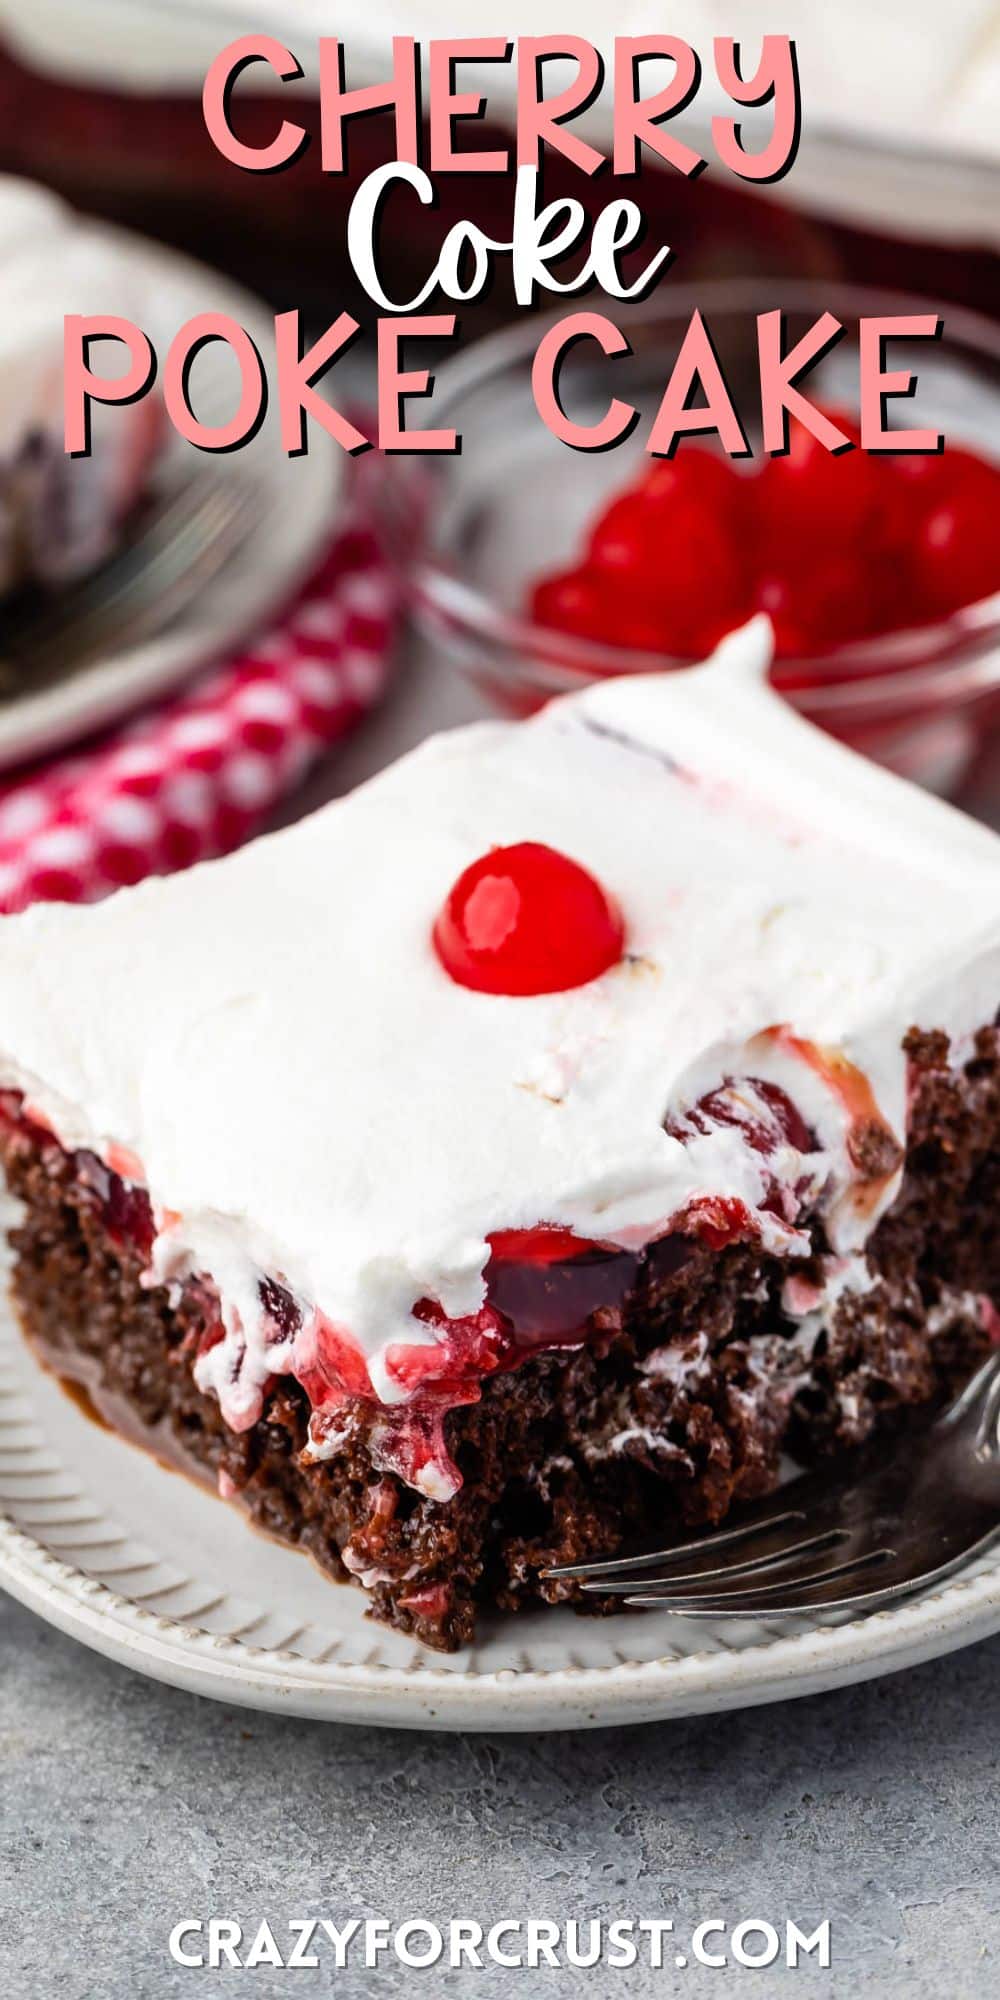 cherry coke cake topped with white topping and a cherry with words on the images.